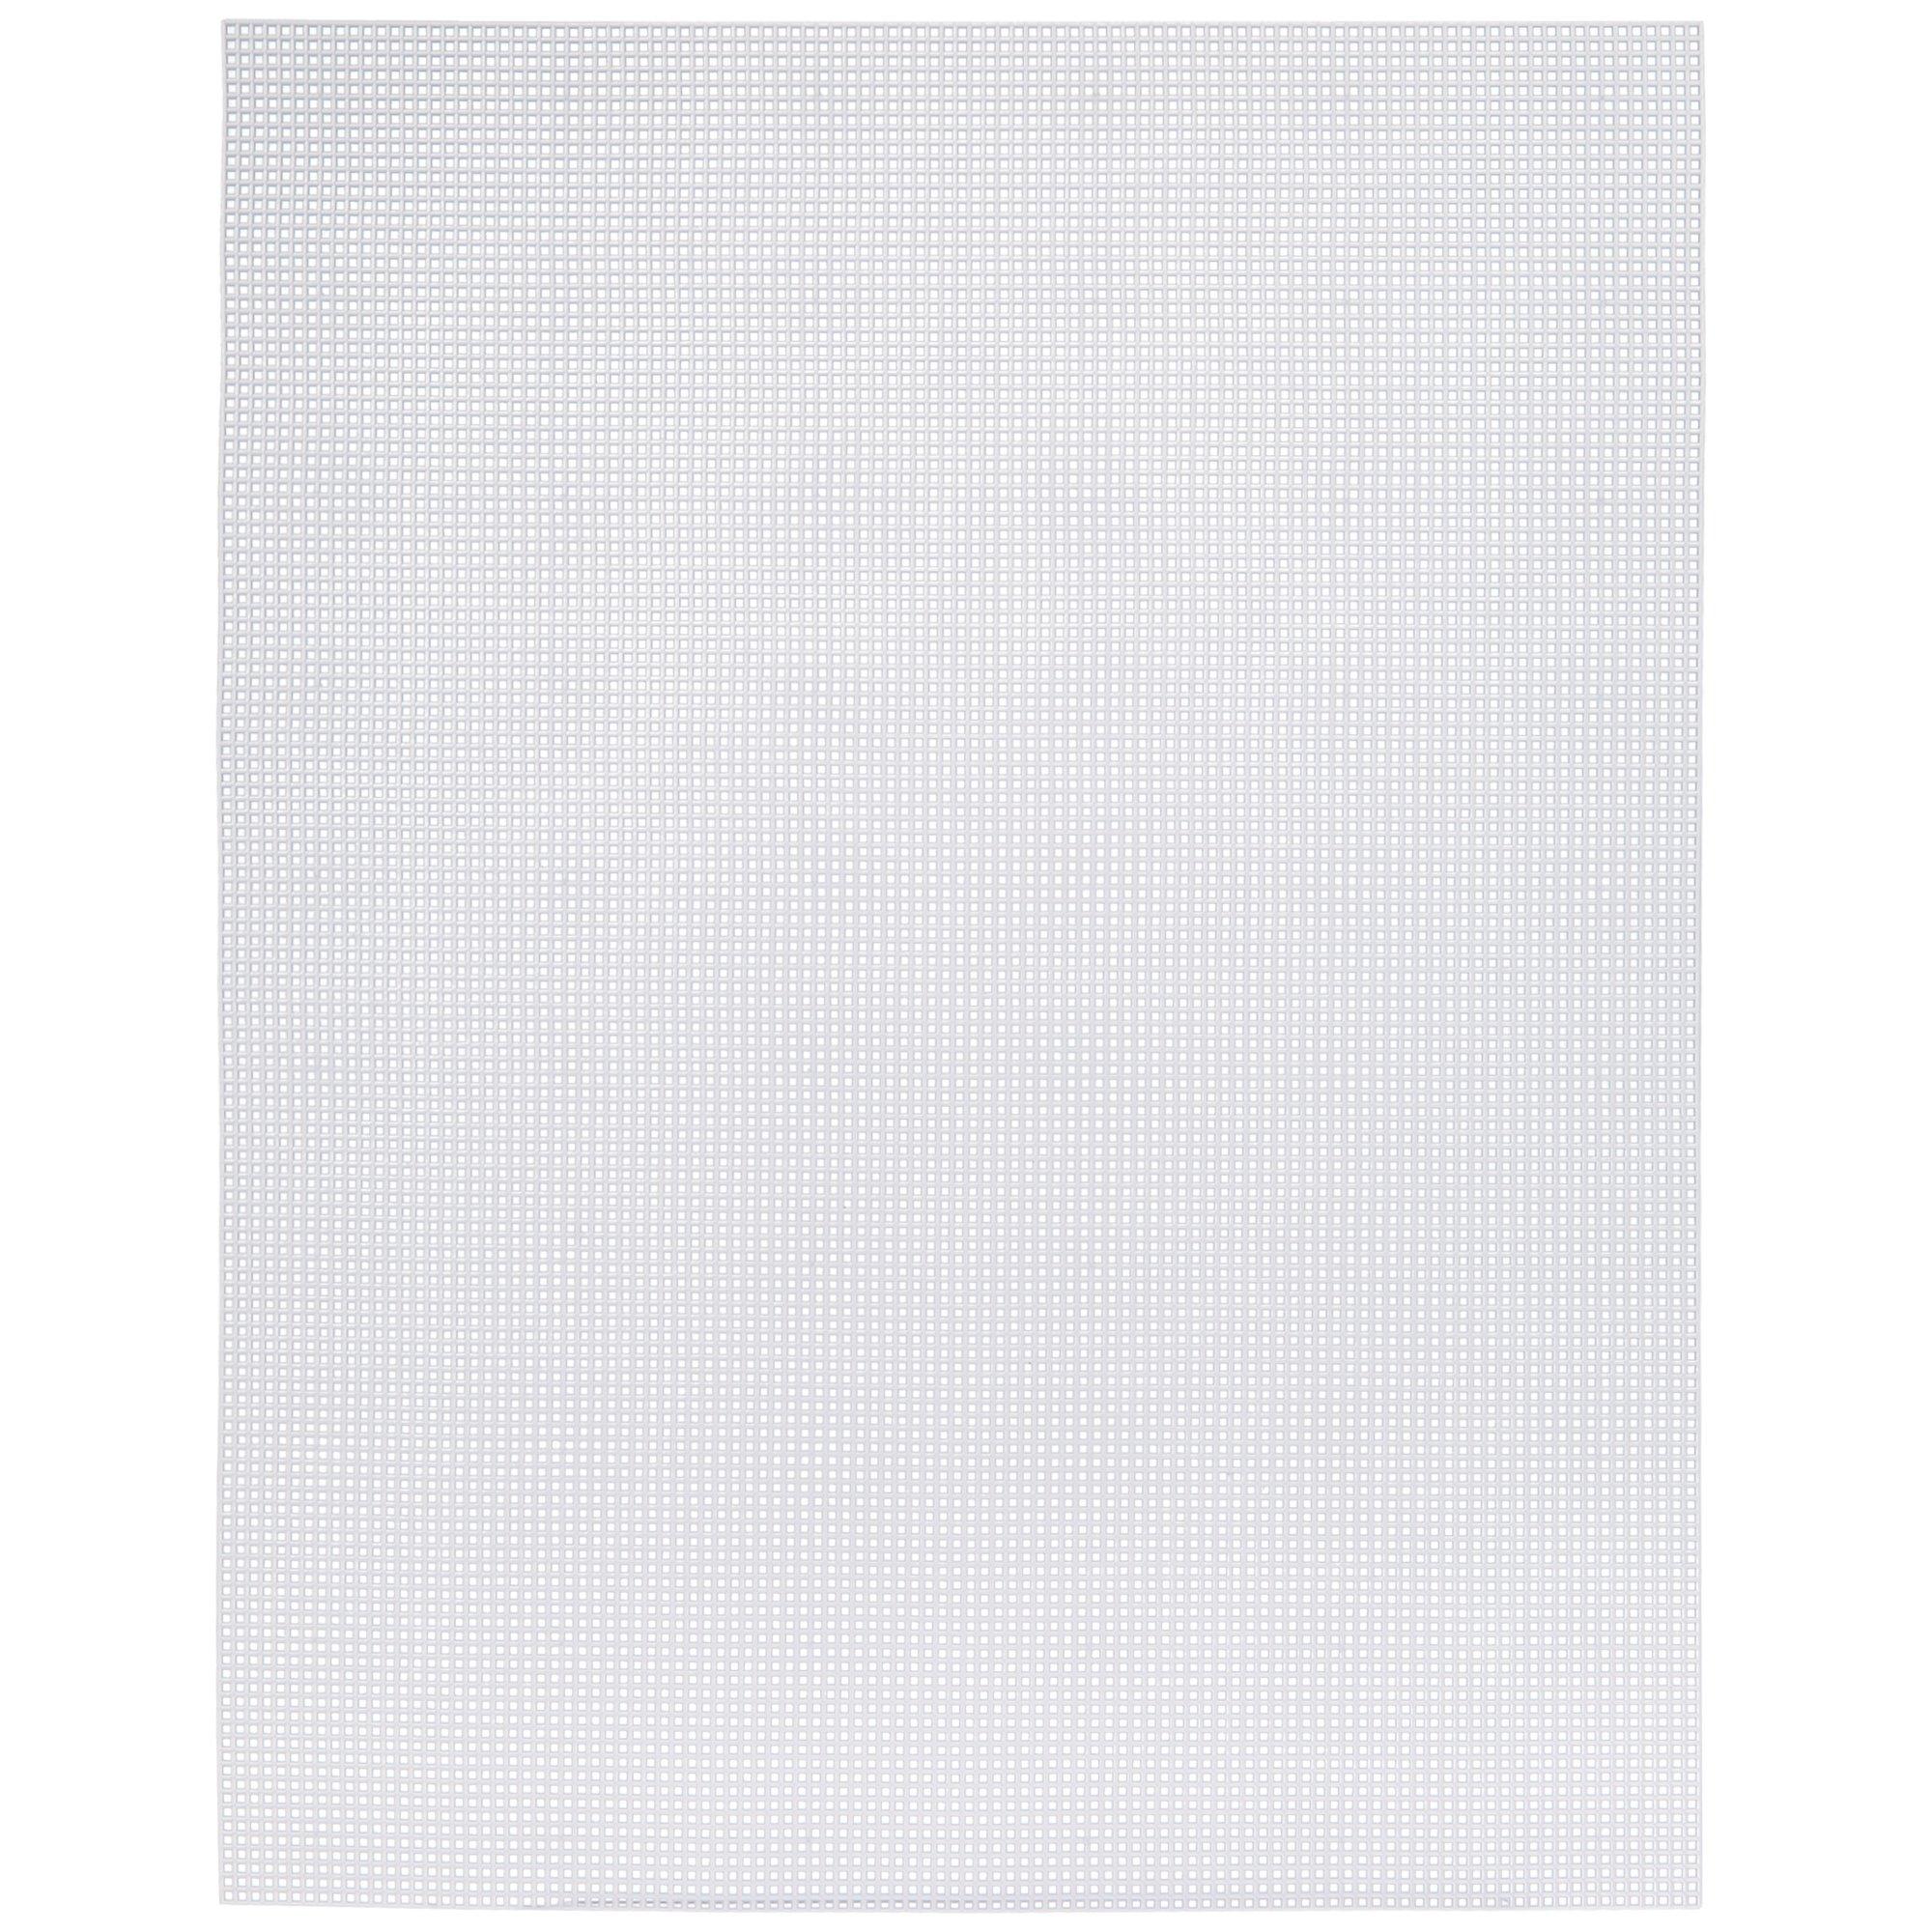 Plastic Canvas Sheets 10-1/2 x 13-1/2 - Assorted (Pack of 12)